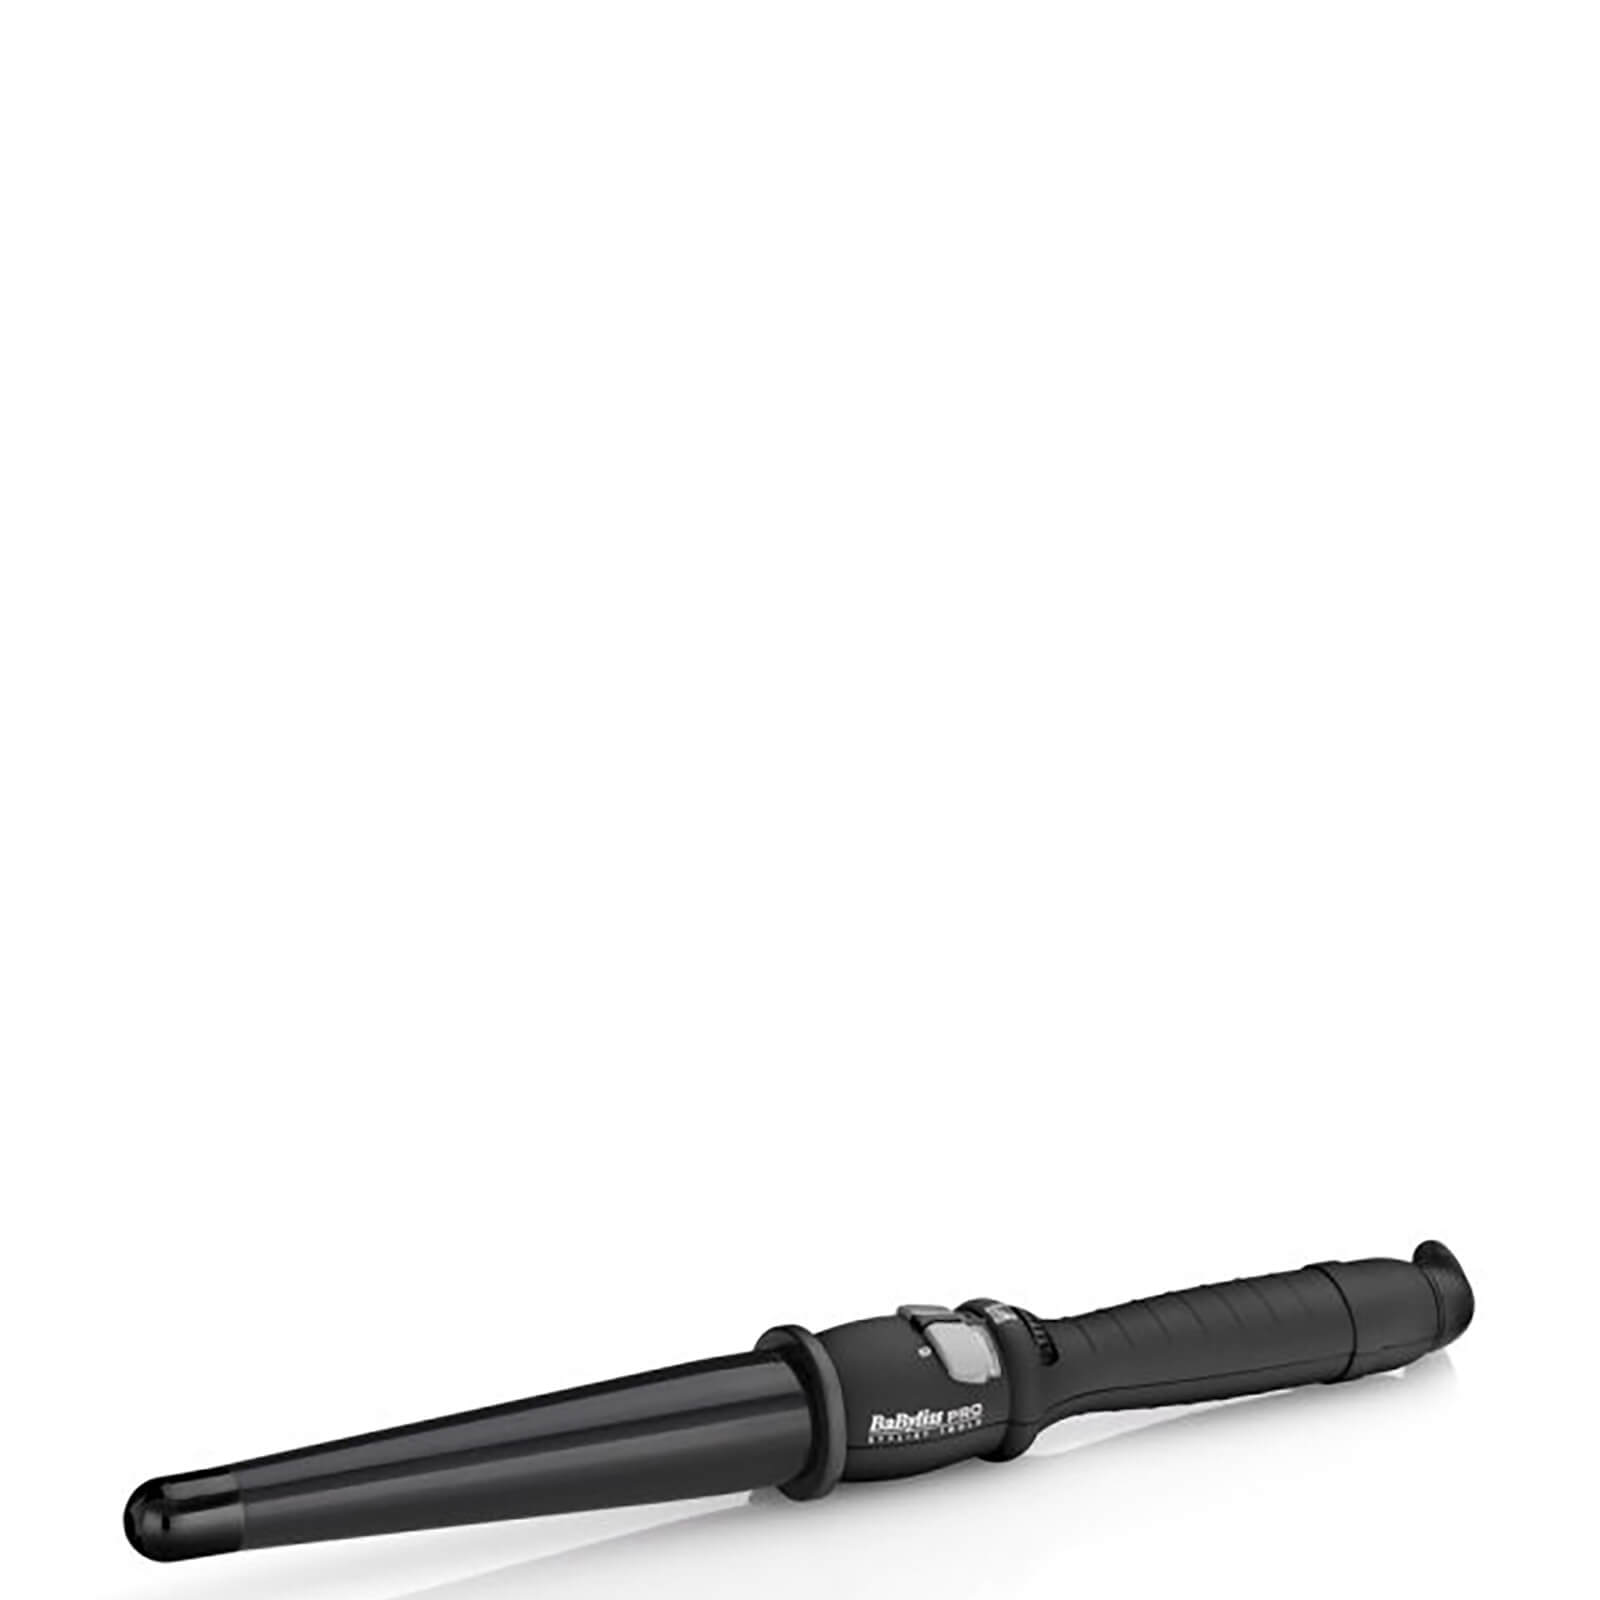 babyliss pro dial a heat conical wand (32-19mm) - black